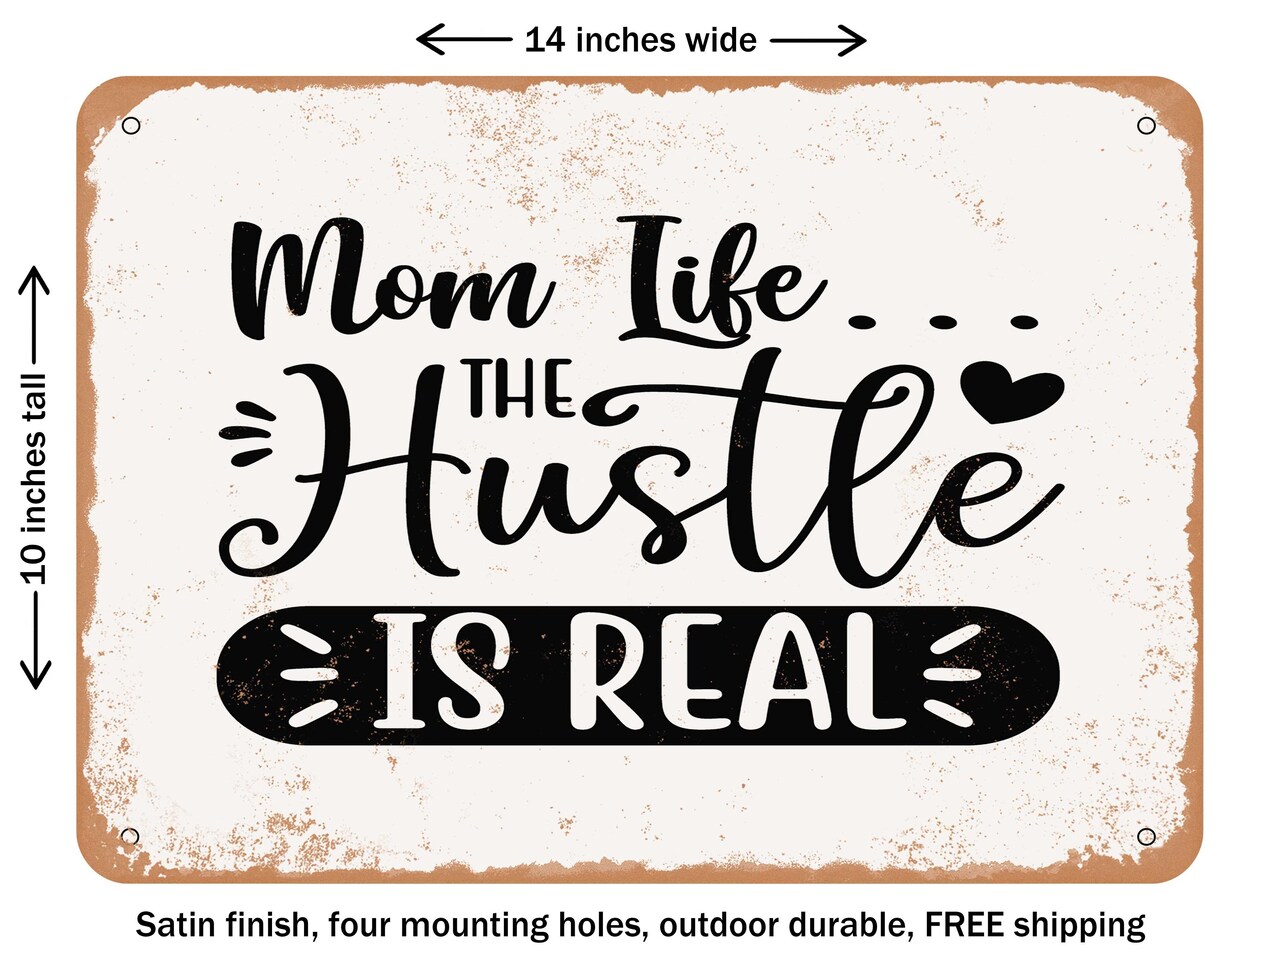 DECORATIVE METAL SIGN - Mom Life the Hustle is Real - Vintage Rusty Look